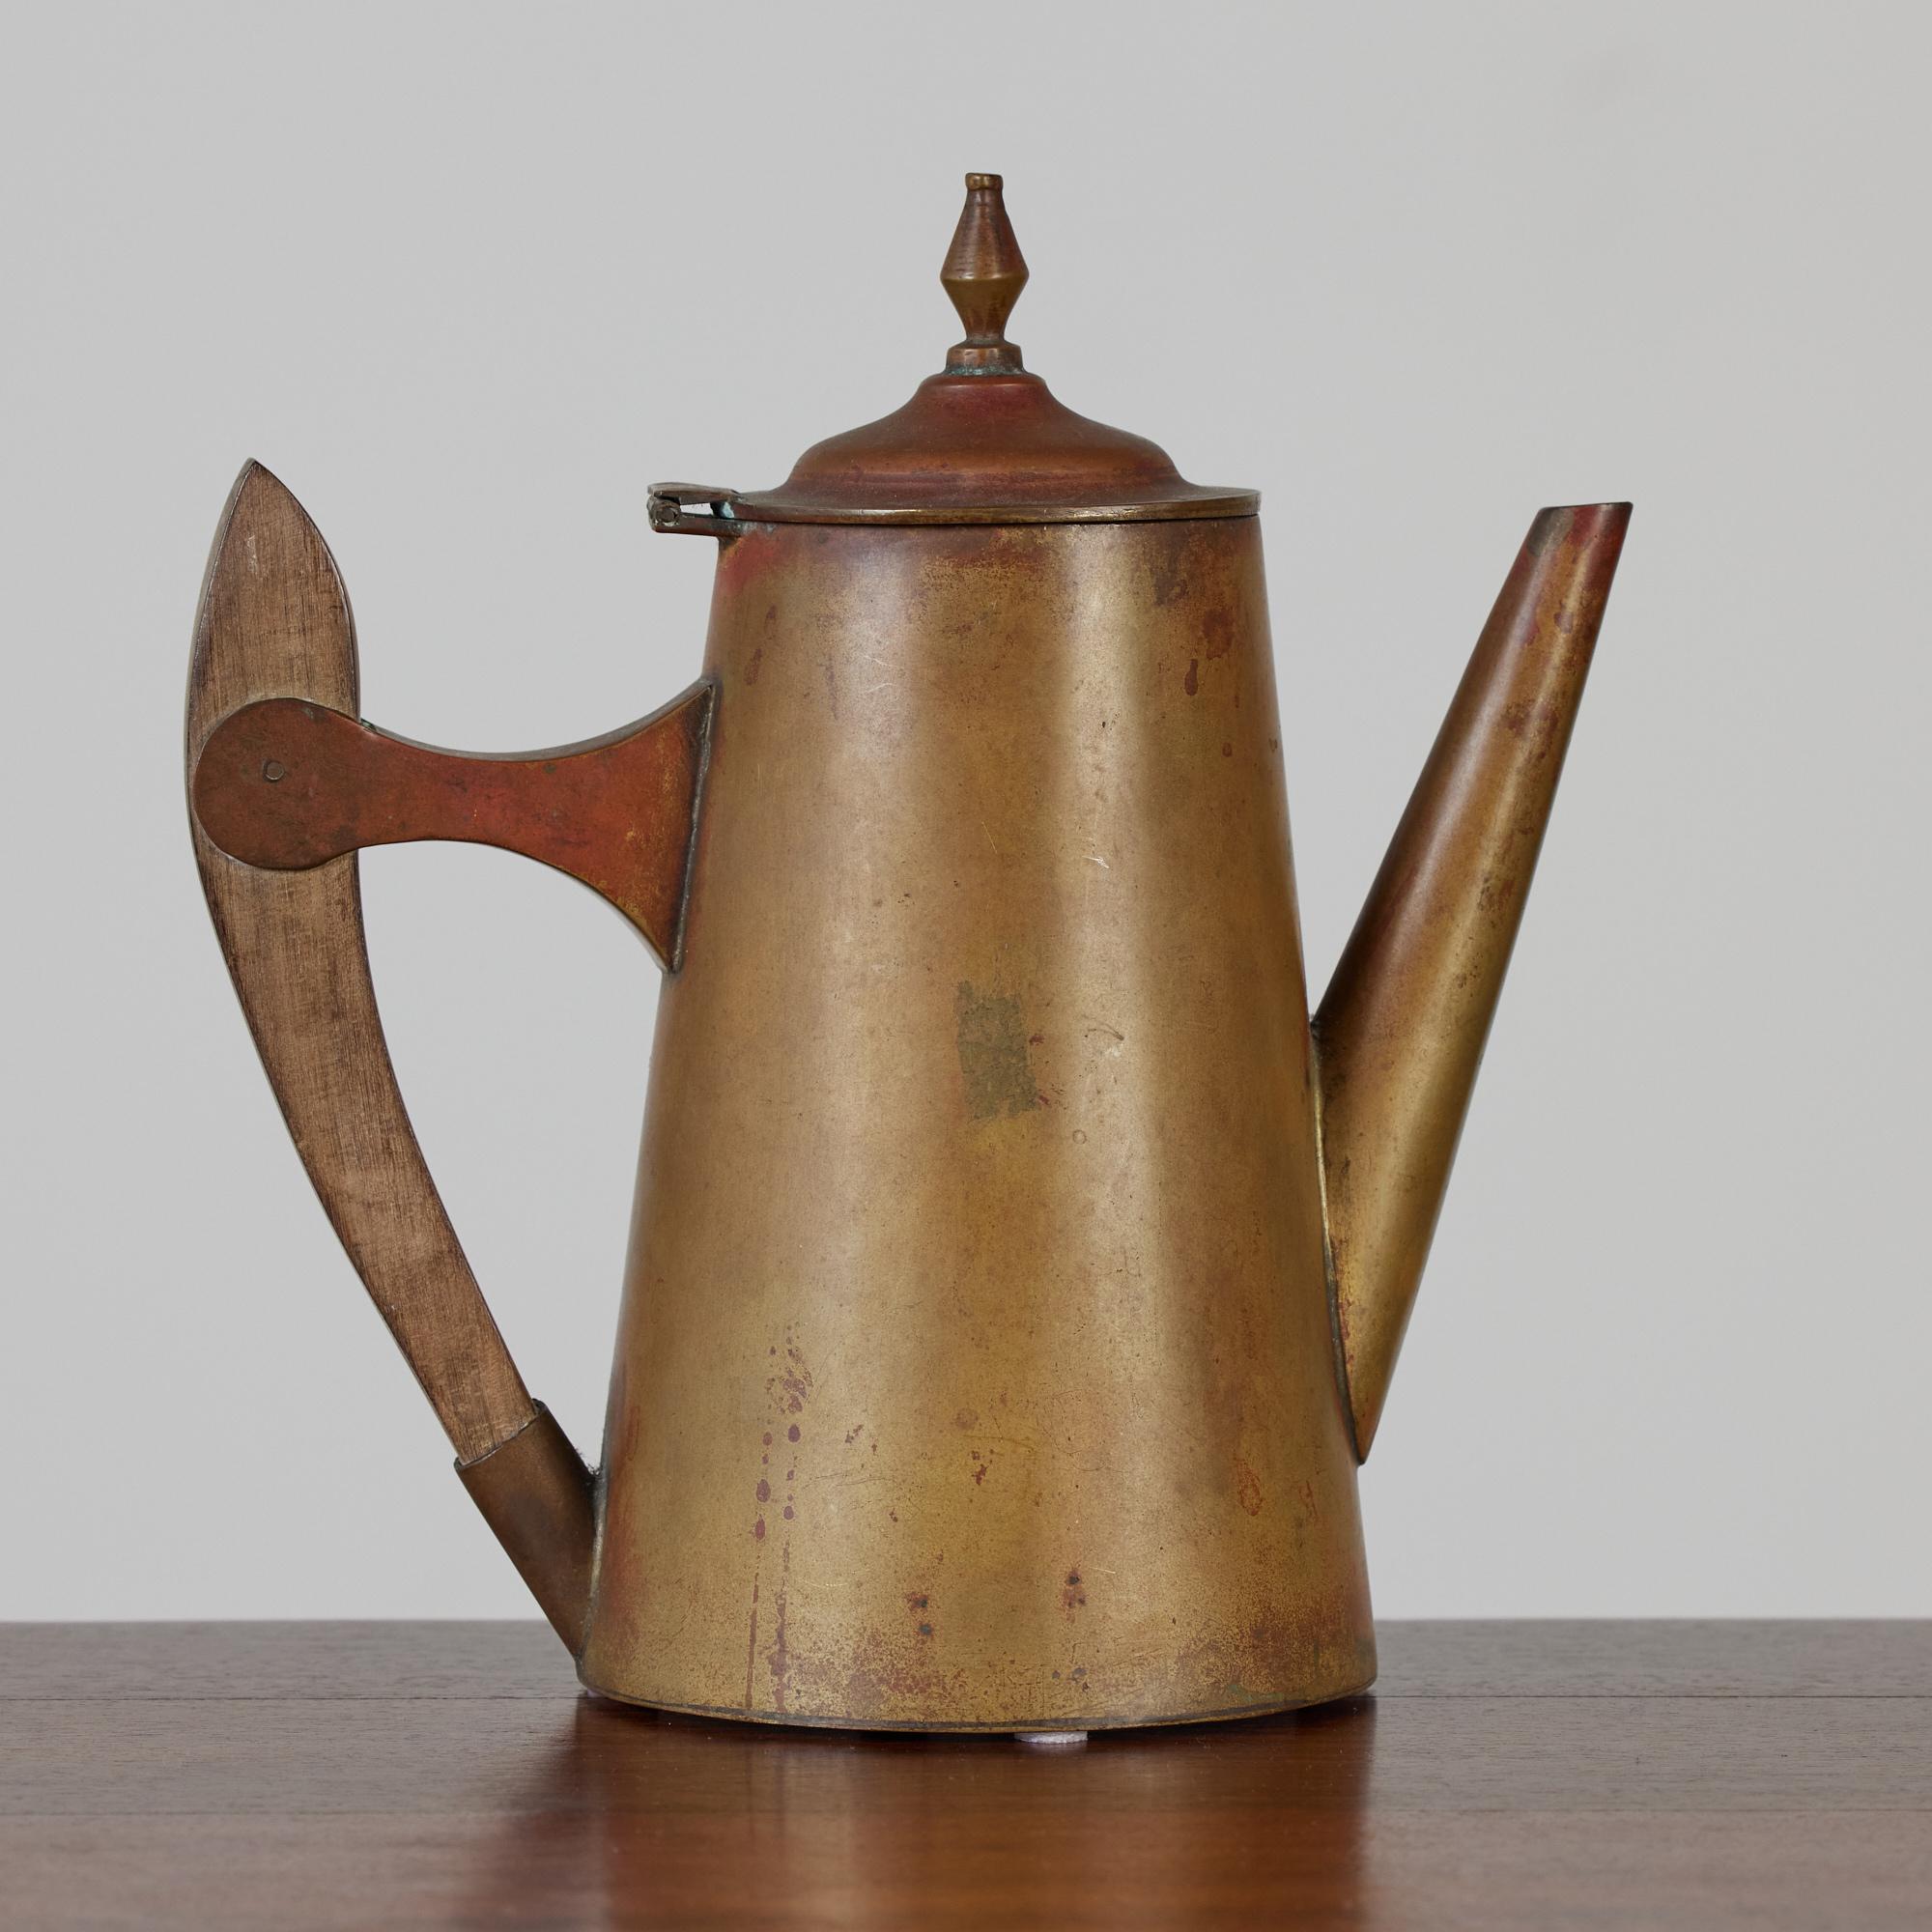 Mexican Patinated Brass Teapot with Wooden Handle